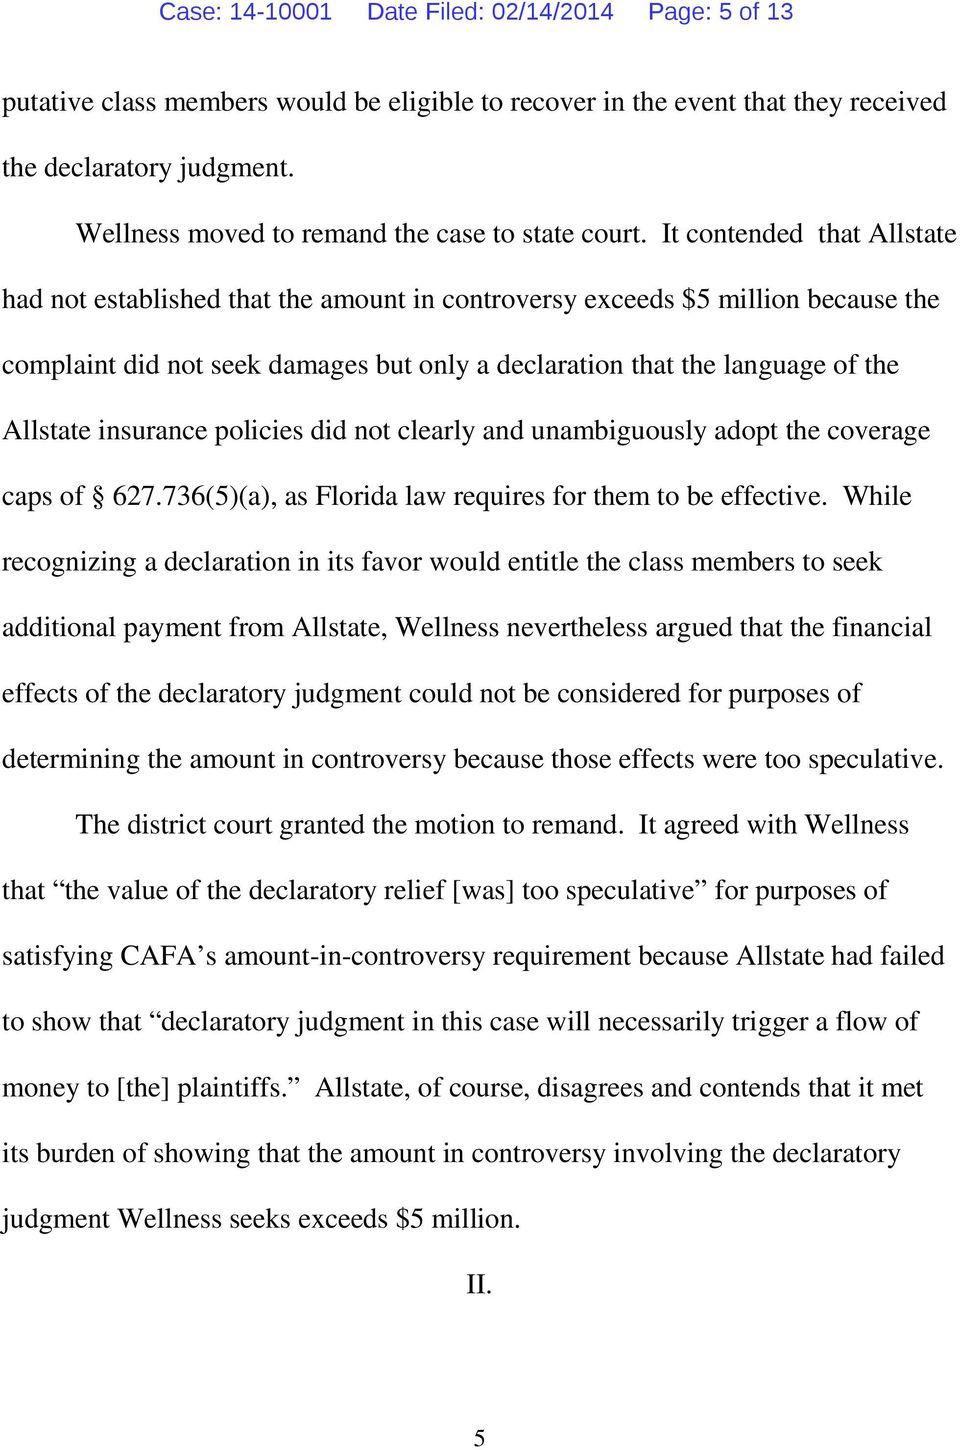 It contended that Allstate had not established that the amount in controversy exceeds $5 million because the complaint did not seek damages but only a declaration that the language of the Allstate